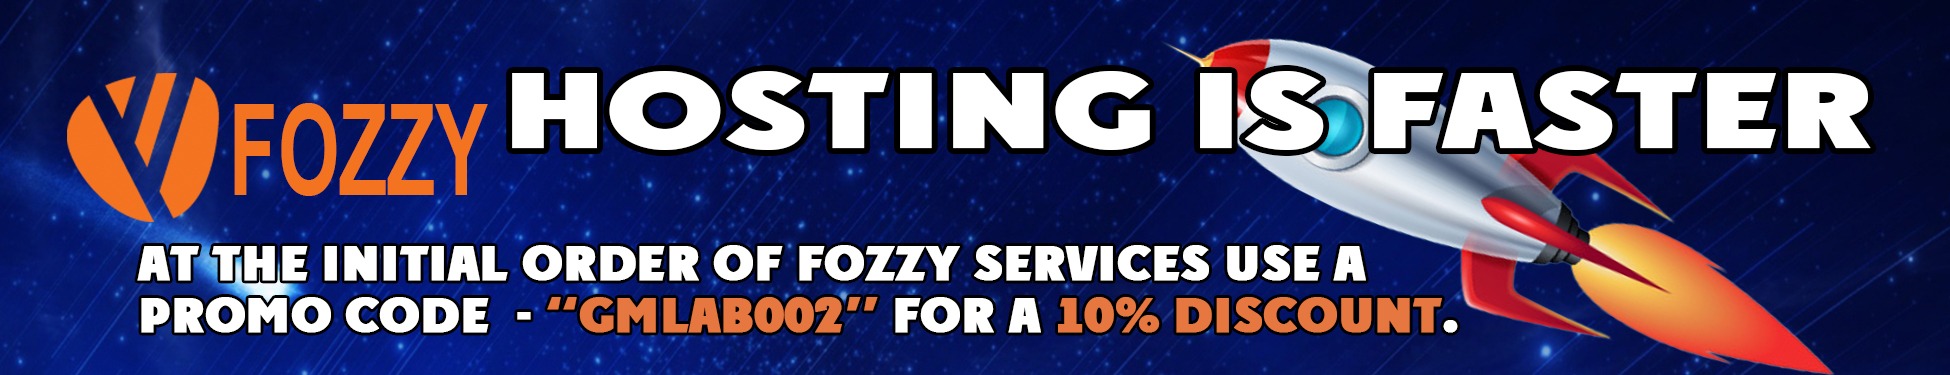 fozzy bunner https://fozzy.com/aff.php?aff=1911